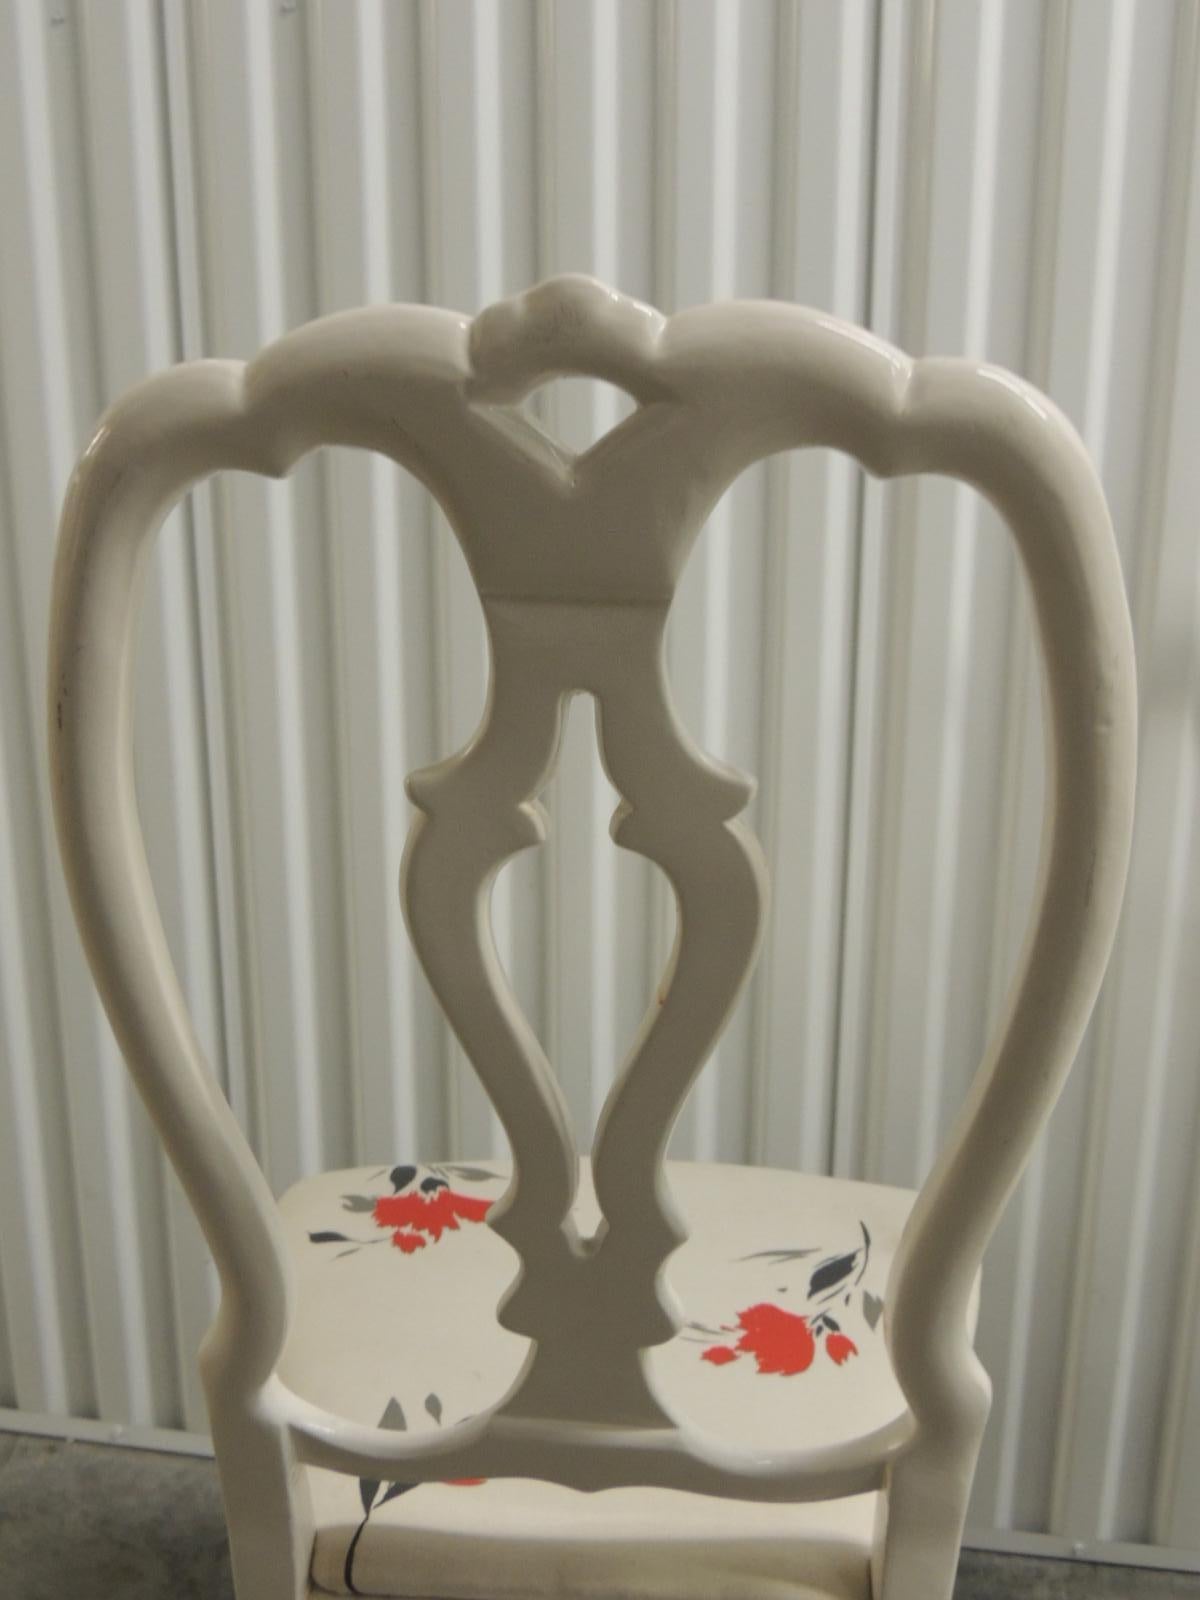 Asian Pair of Vintage White High-Gloss Metal Chairs with Traditional Frames